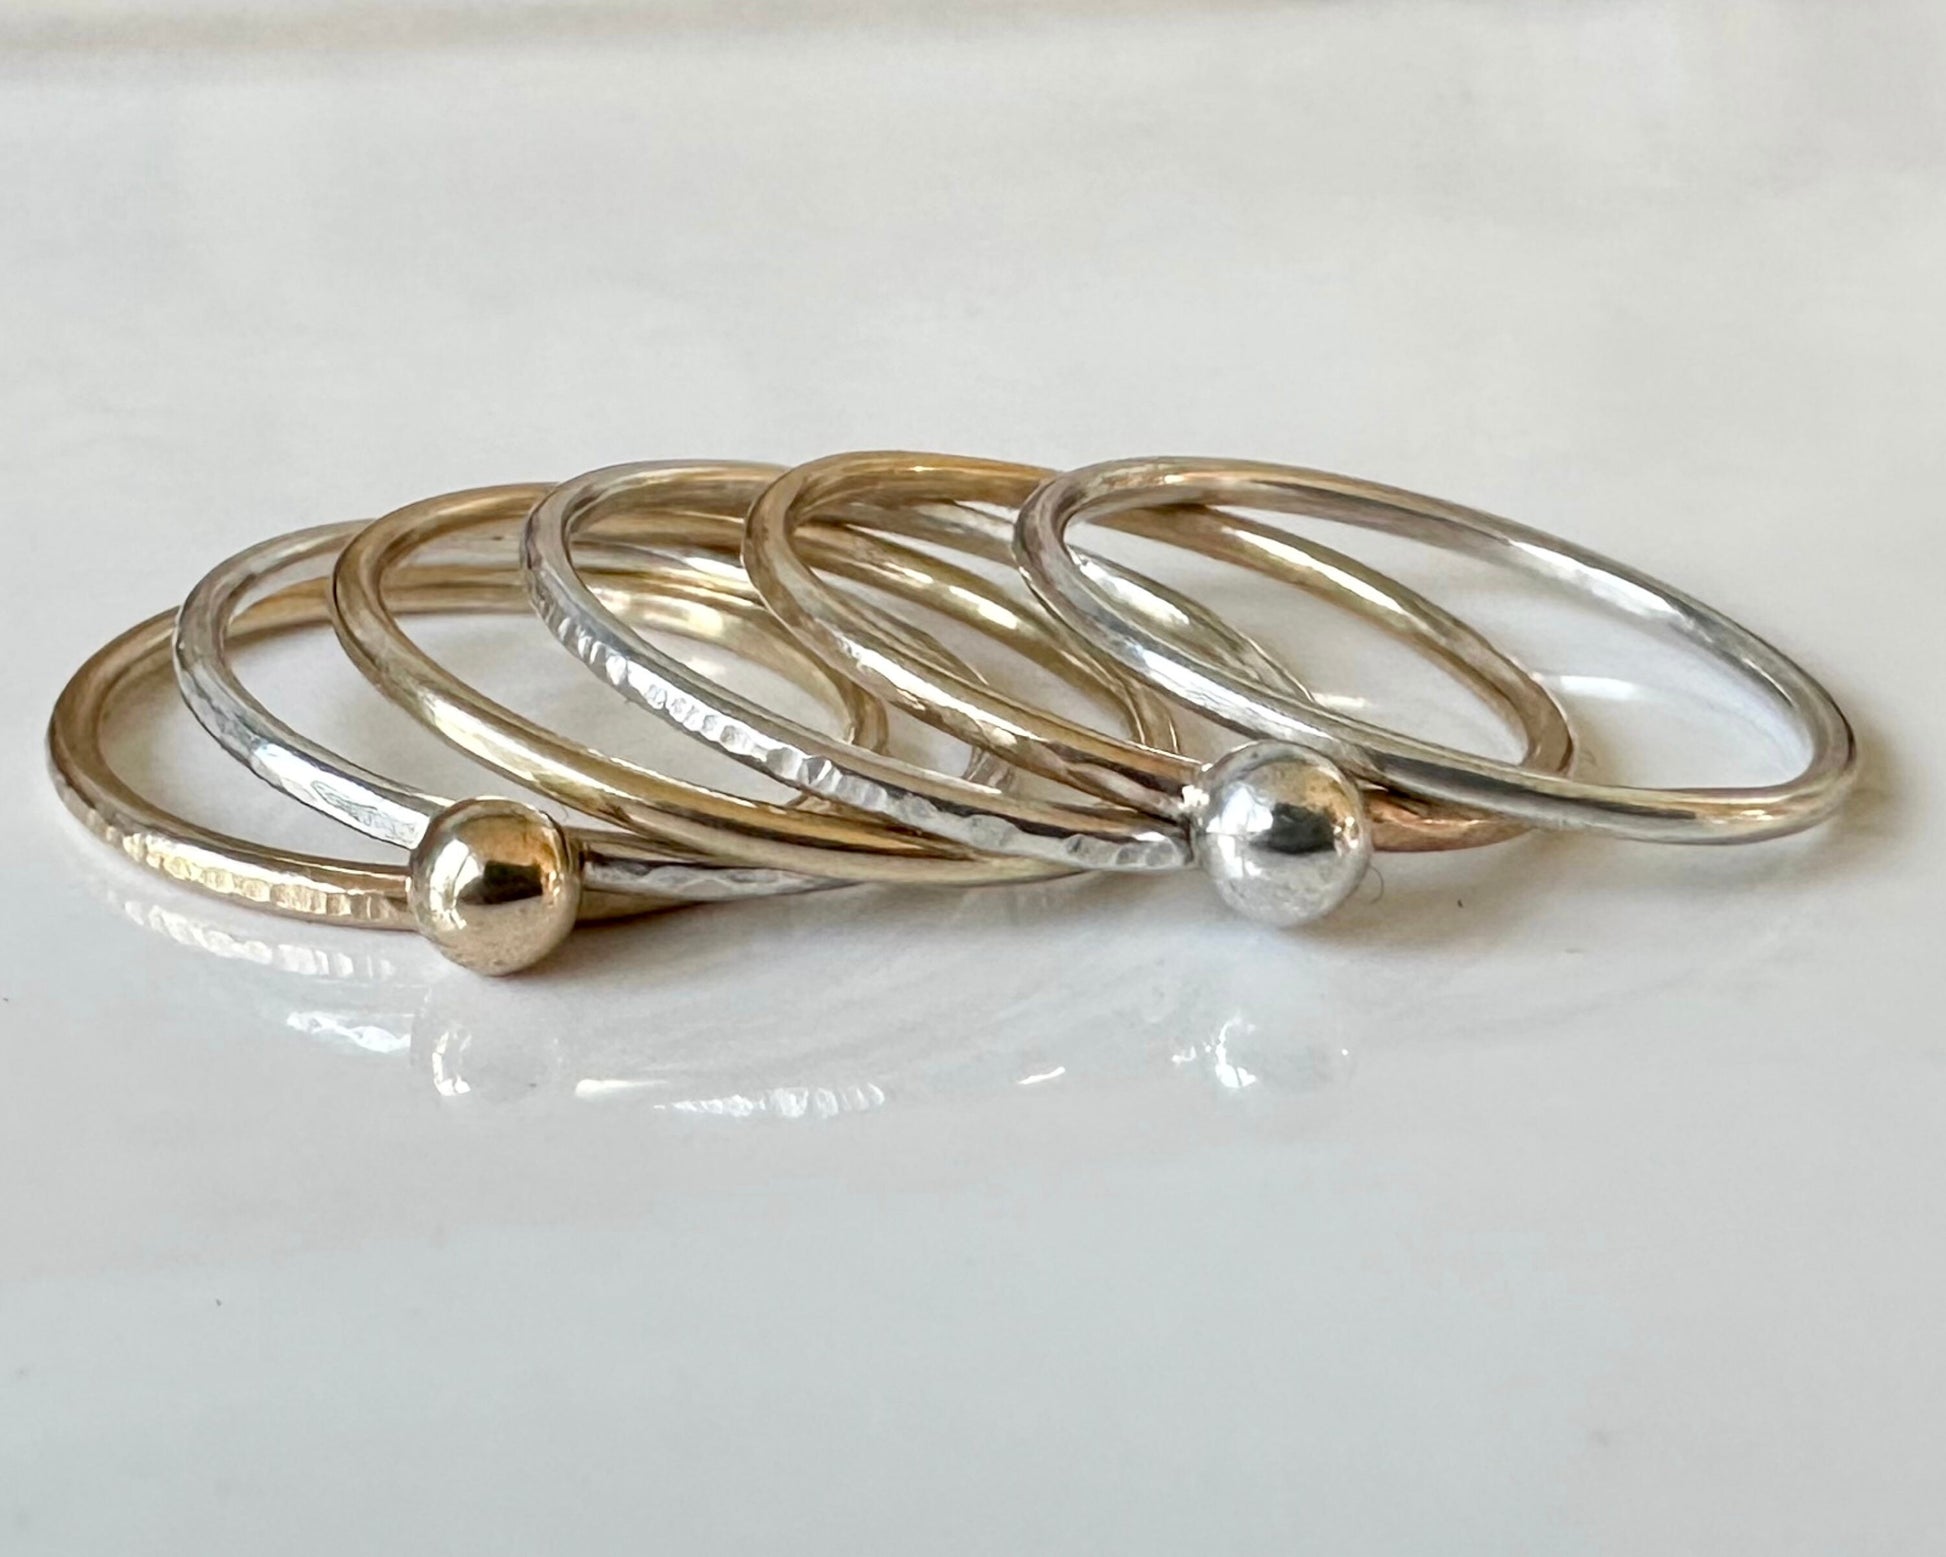 Set of Six Gold and Silver Skinny Stacking Rings, 9ct Gold, 925 Sterling Silver, Nugget Rings, Pebble Rings, Stacking Ring Set